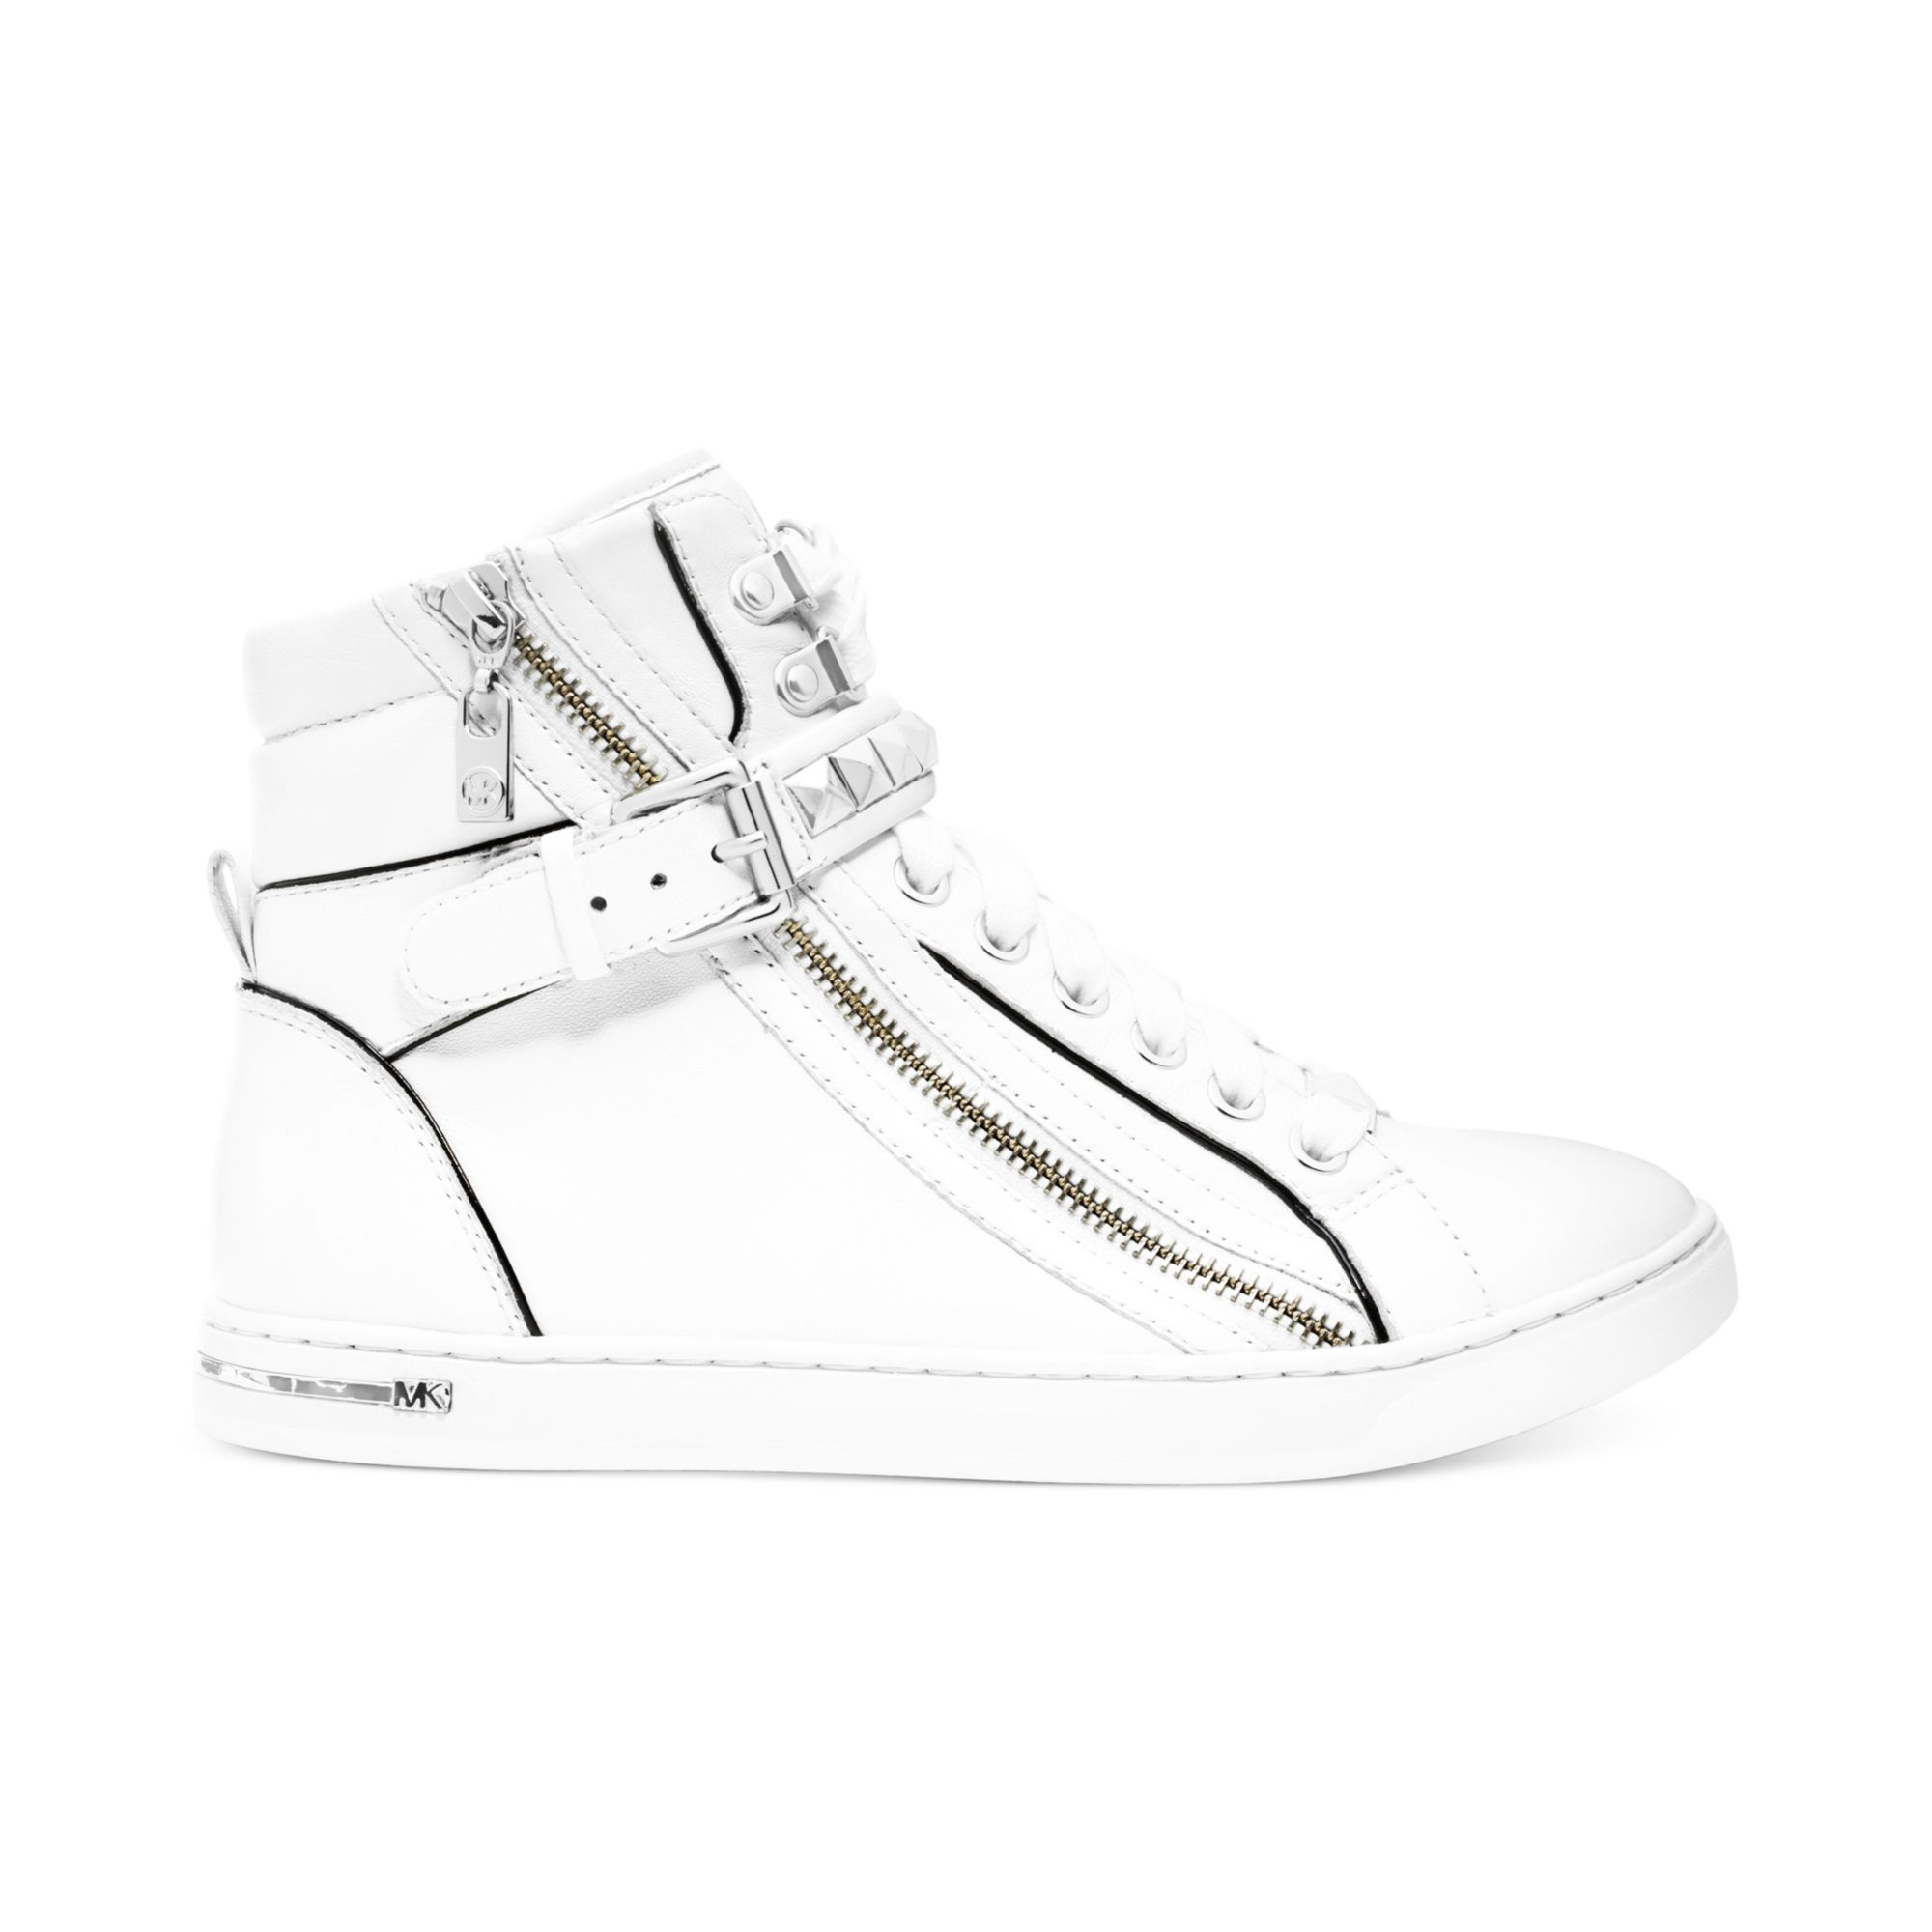 Lyst - Michael Kors Michael Glam Studded High Top Sneakers in White